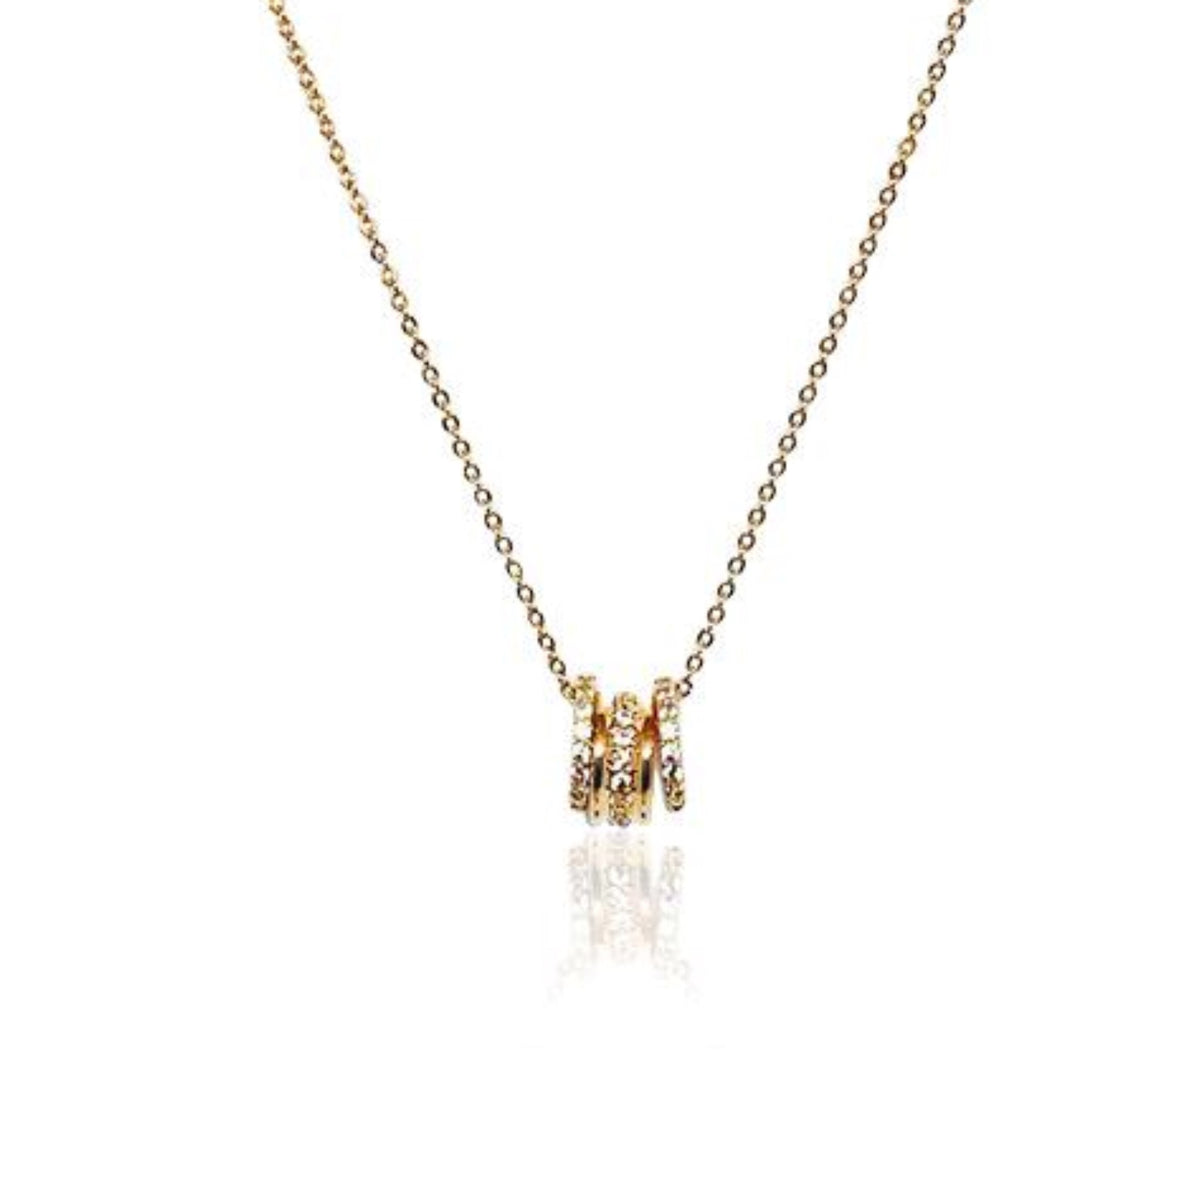 CHOMEL Cubic ZIrconia 3 Ring Pendant on Rosegold Necklace